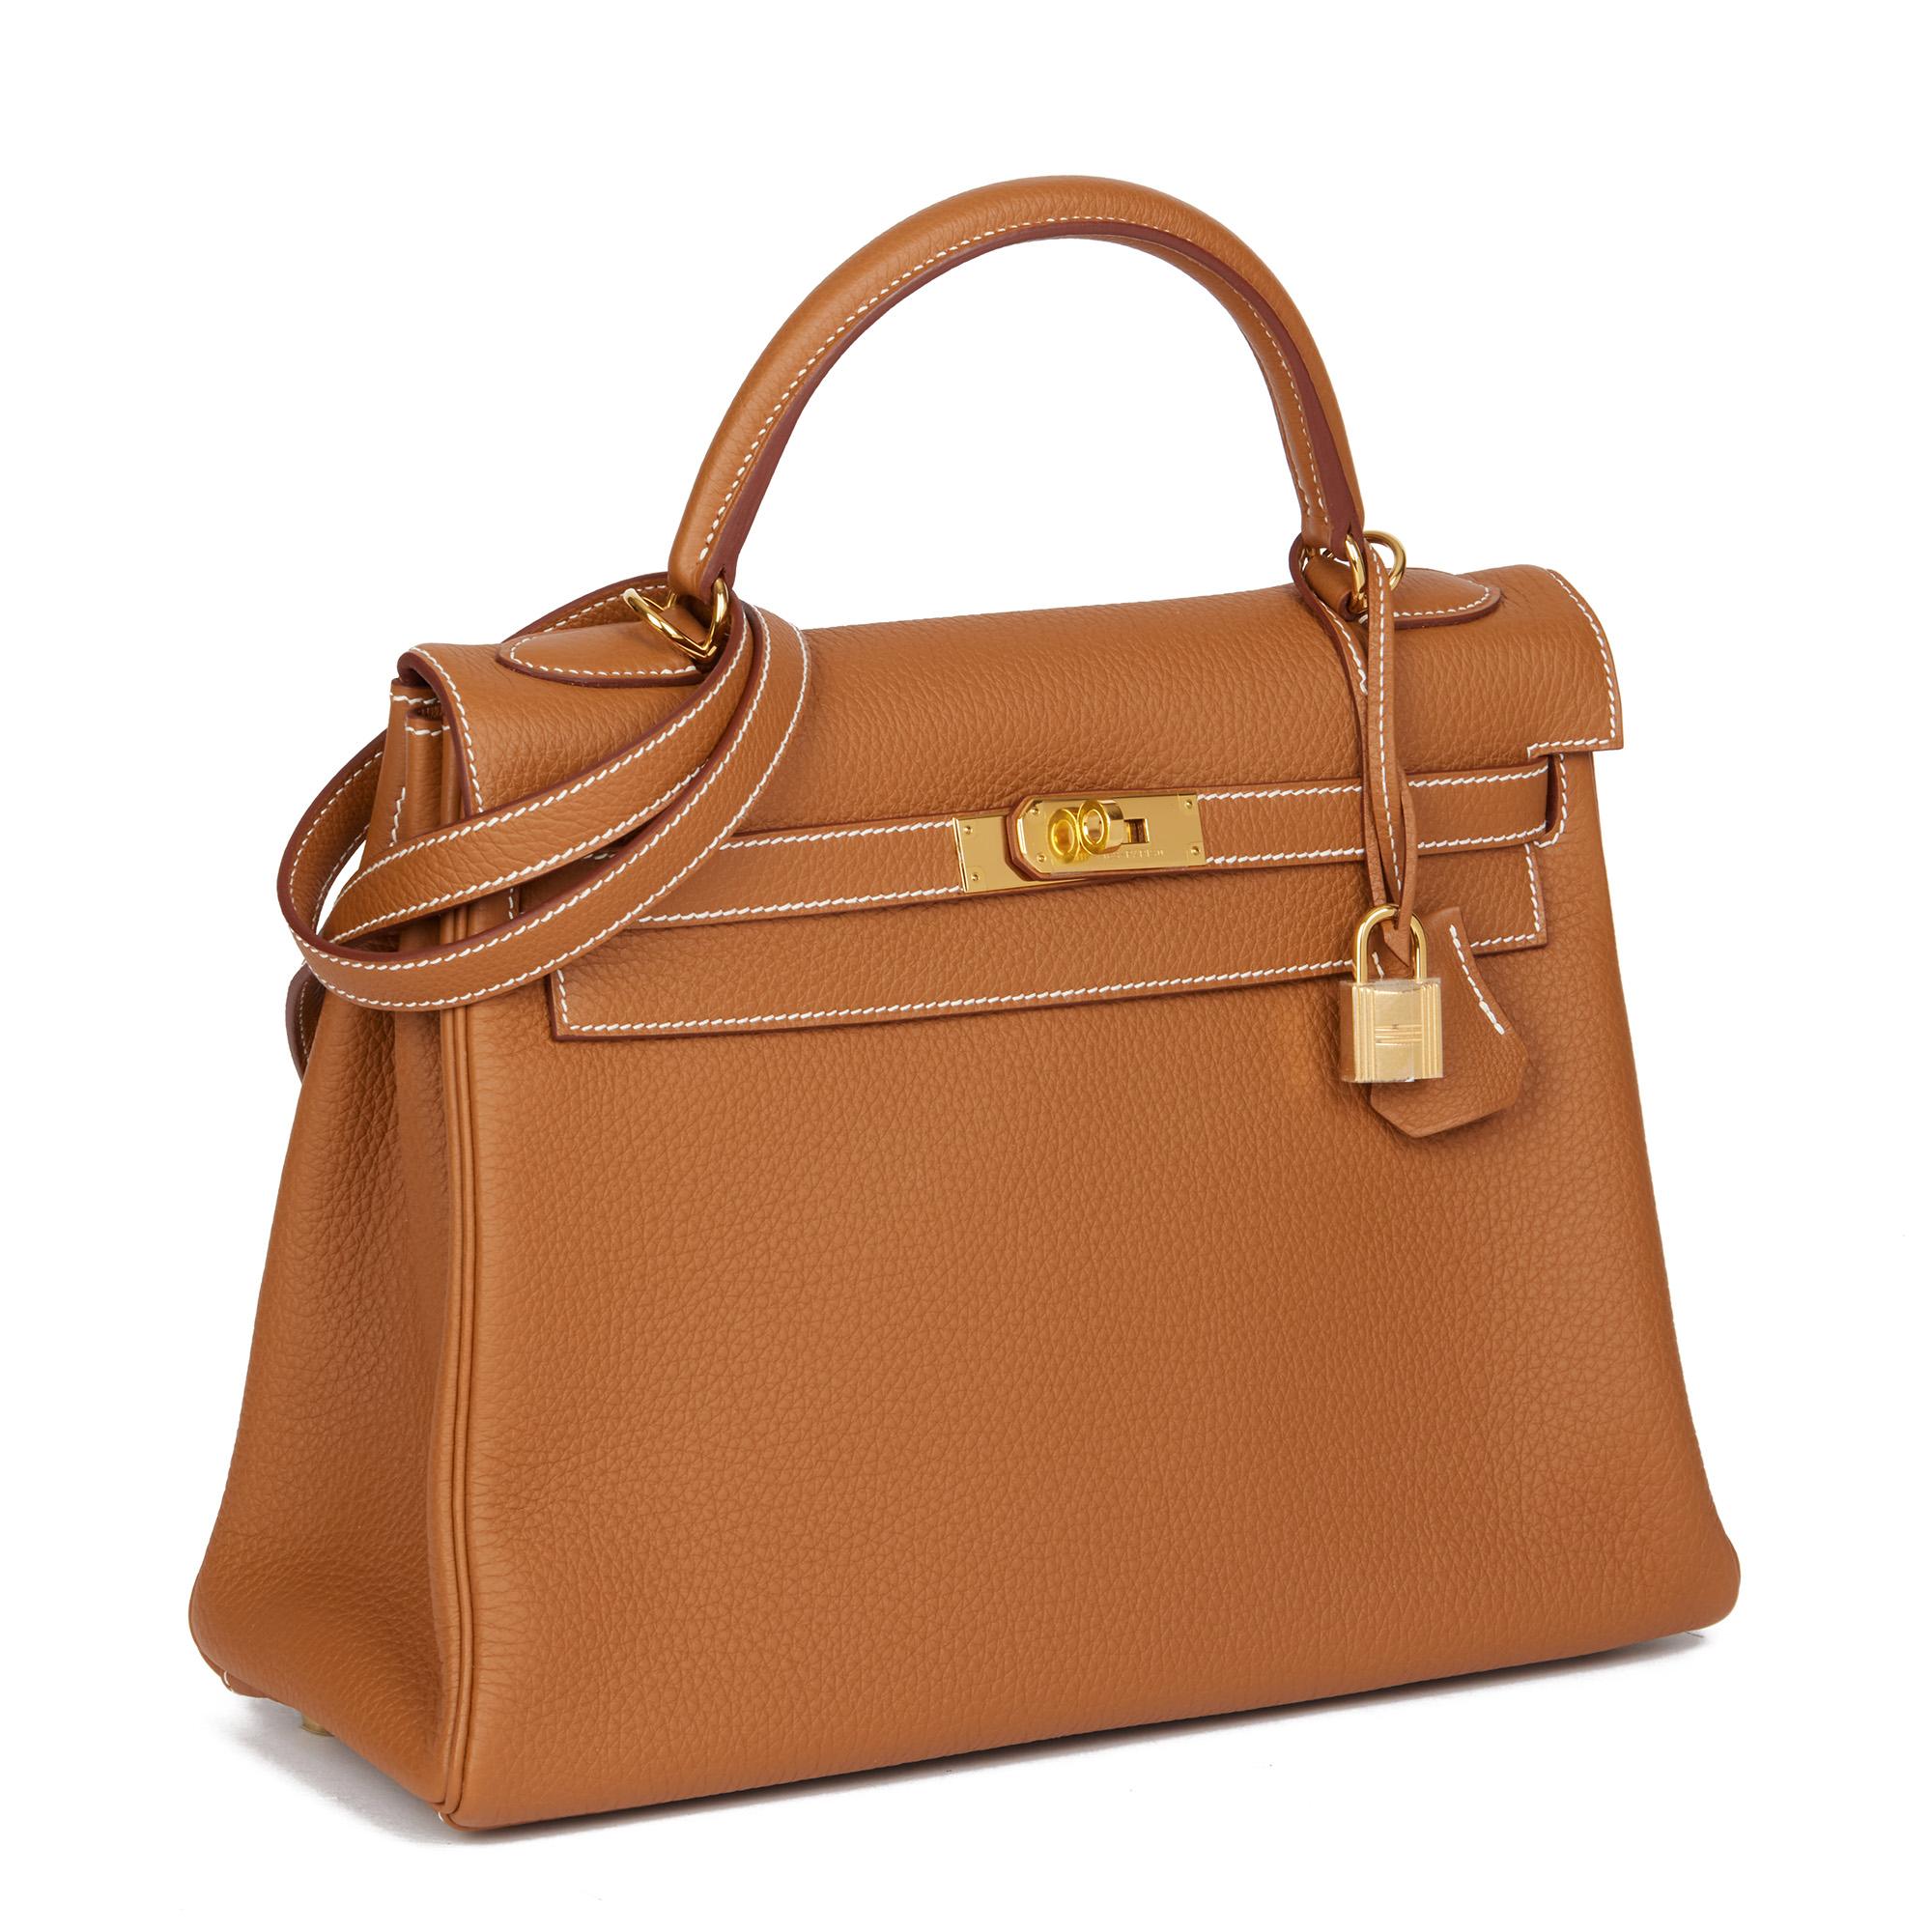 Hermès GOLD TOGO LEATHER KELLY 32CM RETOURNE

CONDITION NOTES
This item is in unworn condition.

XUPES REFERENCE	JJLG100
BRAND	Hermès
MODEL	Kelly 32cm
AGE	2013
GENDER	Women's
MATERIAL(S)	Togo Leather
COLOUR	Beige
BRAND